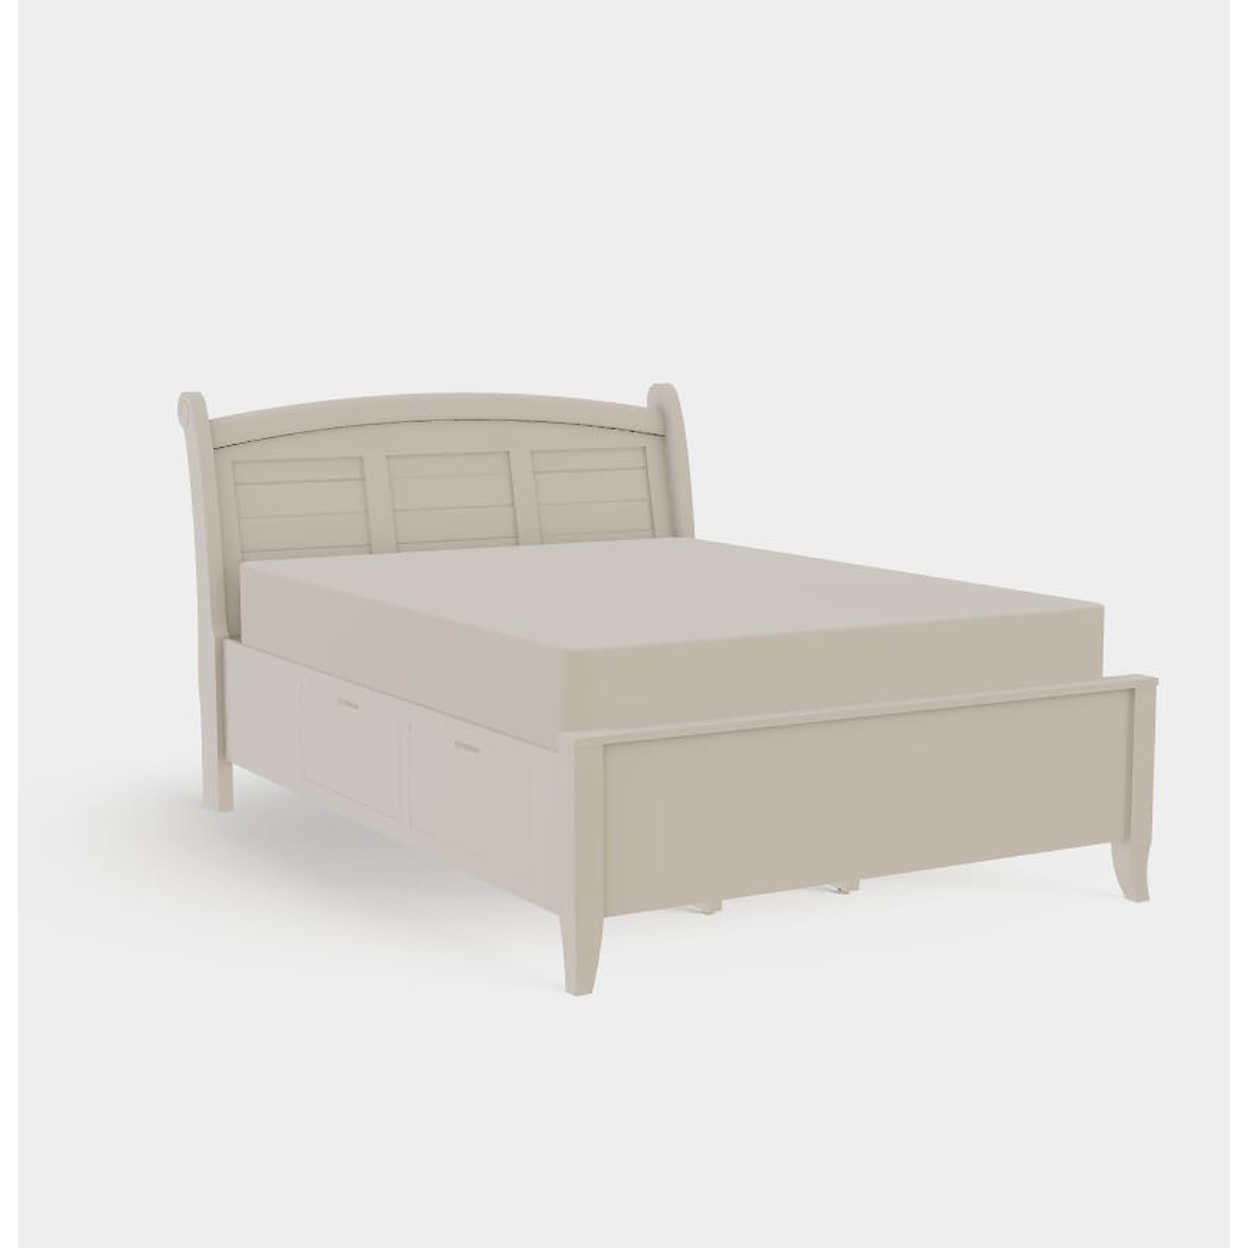 Mavin Tribeca Queen Arched Both Drawerside Bed